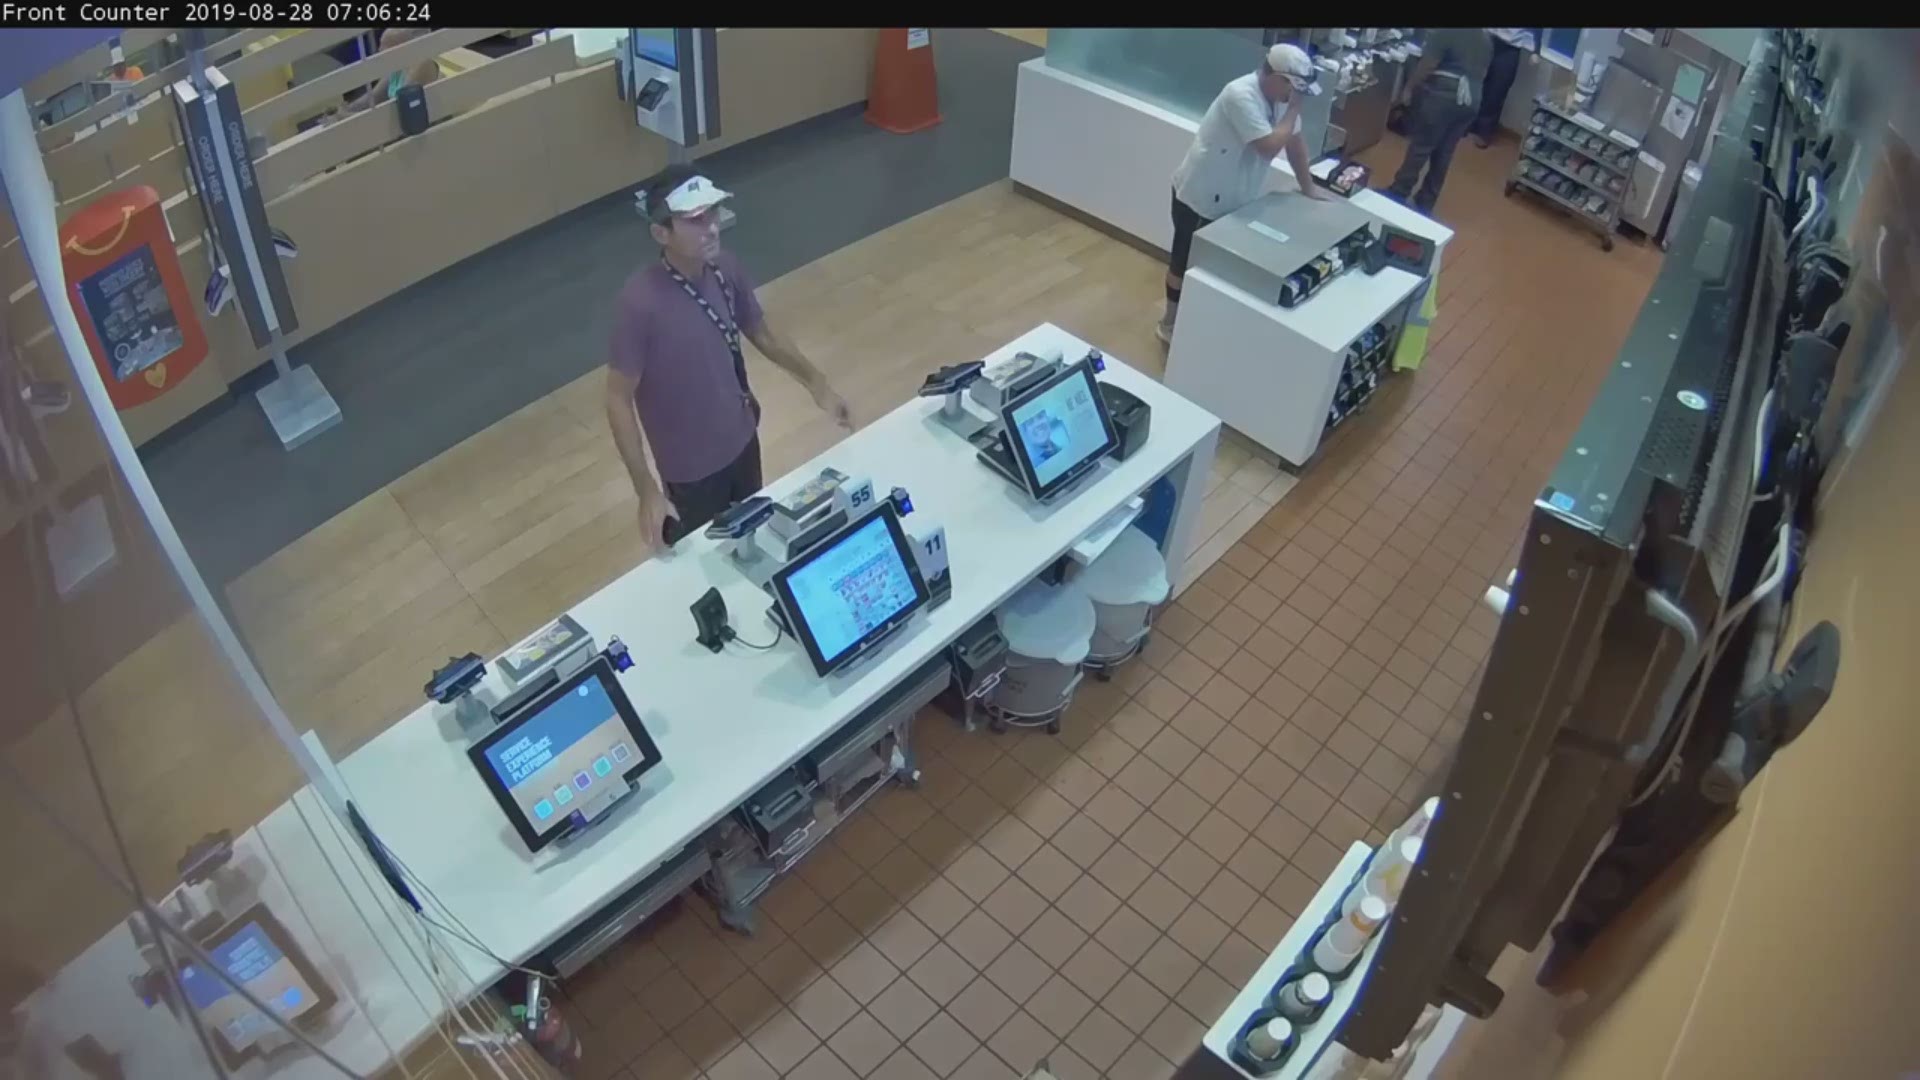 Police need your help finding the man accused of threatening local fast food workers.